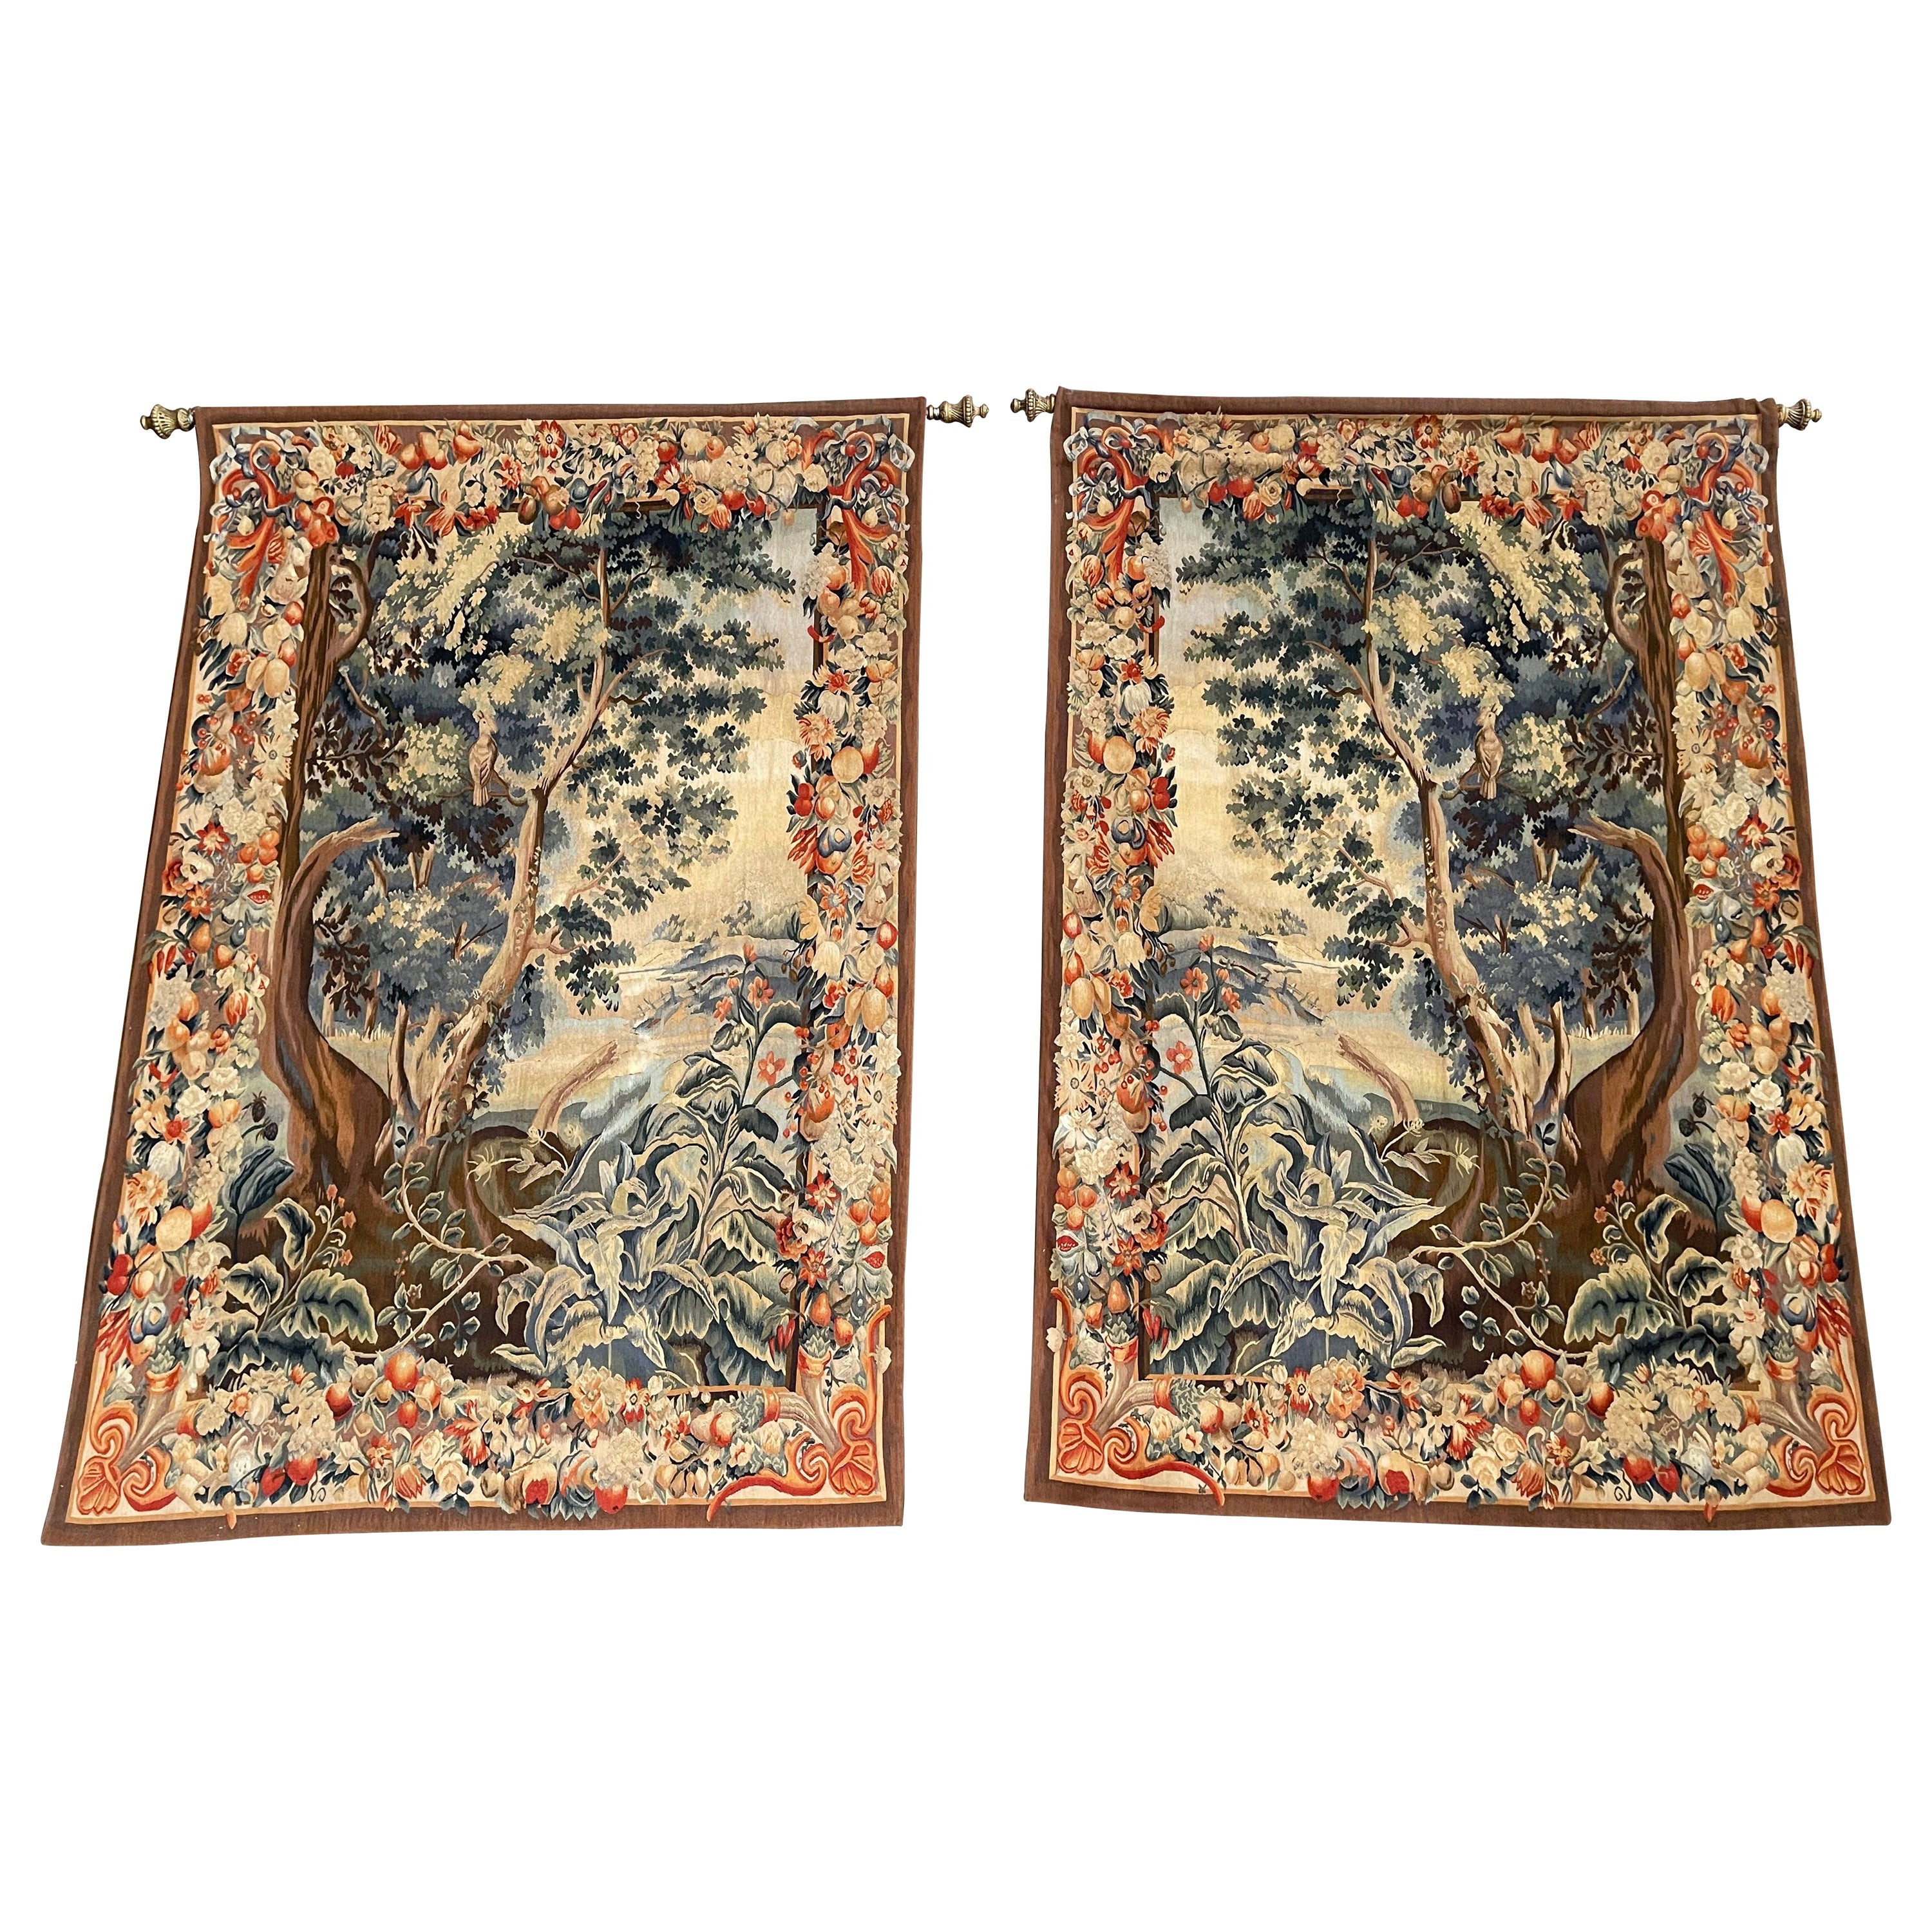 Tapestry pillowcaseRomance17*18 43*45cm -jacquard woven-Victorian style with soothing pastoral motifs-French,English & Baroque tapestry.